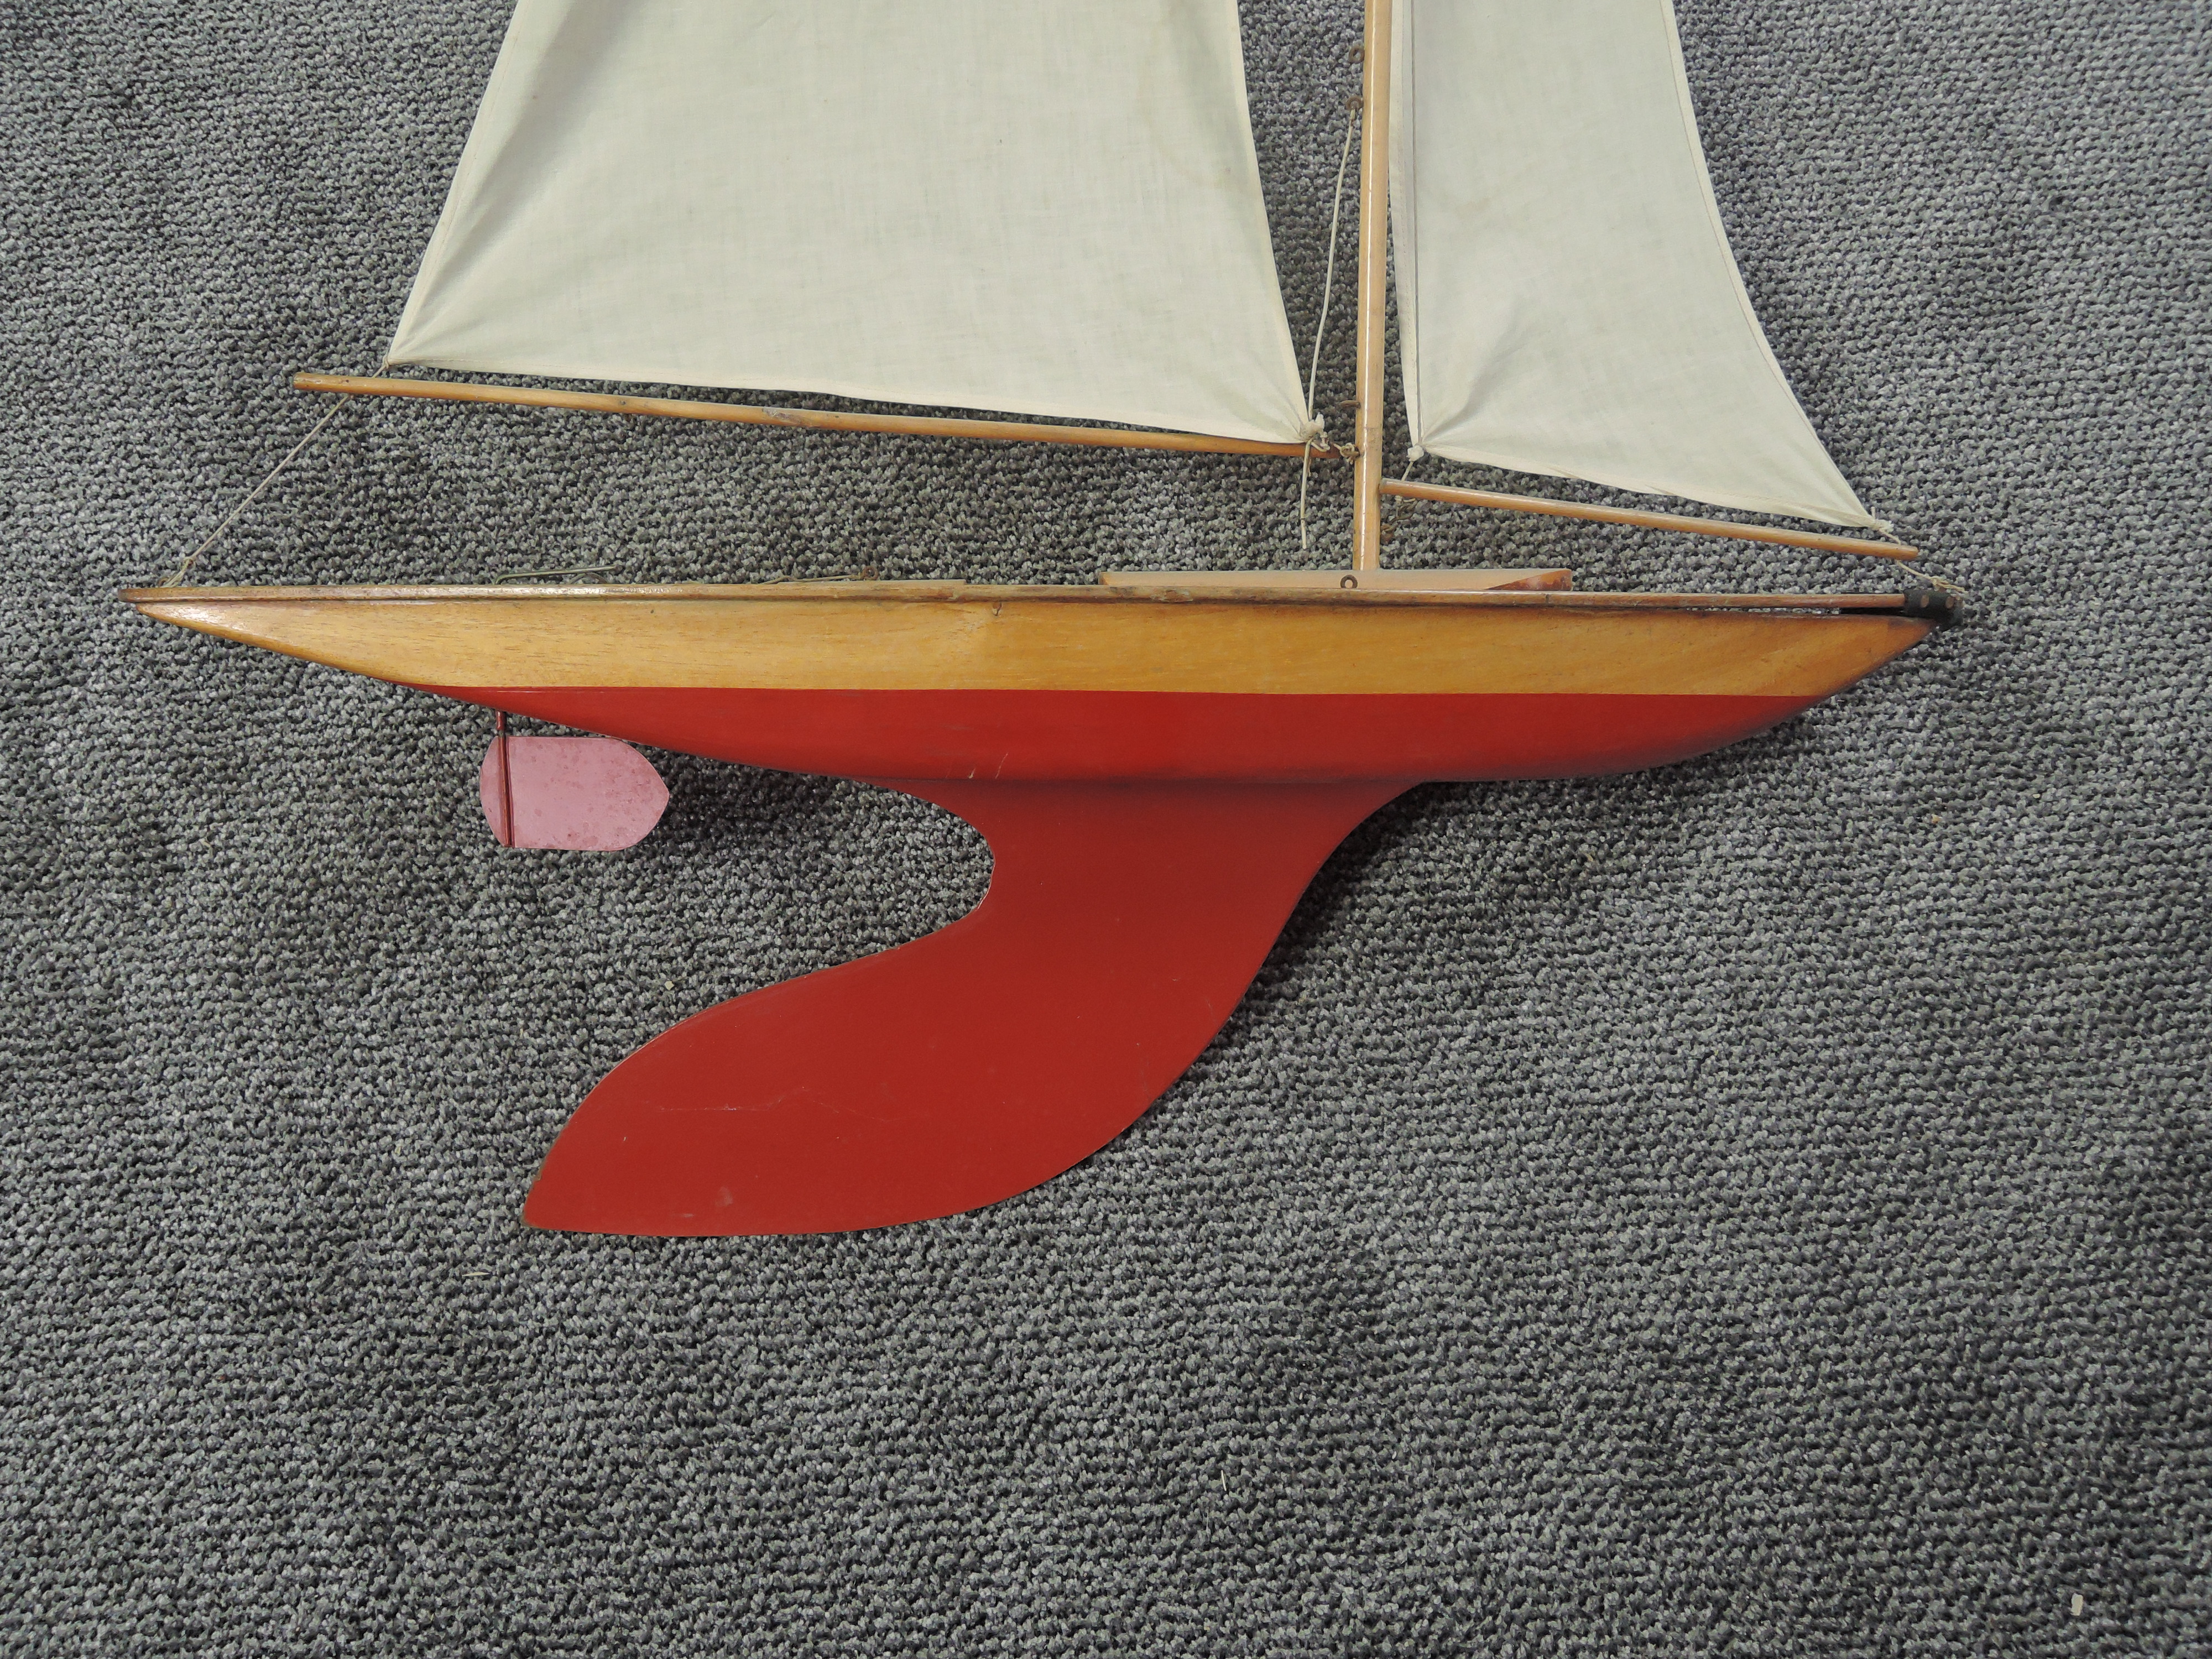 A Bowman wooden model Racing Yacht, height 150cm approx, length 70cm approx, on wooden stand - Image 6 of 6